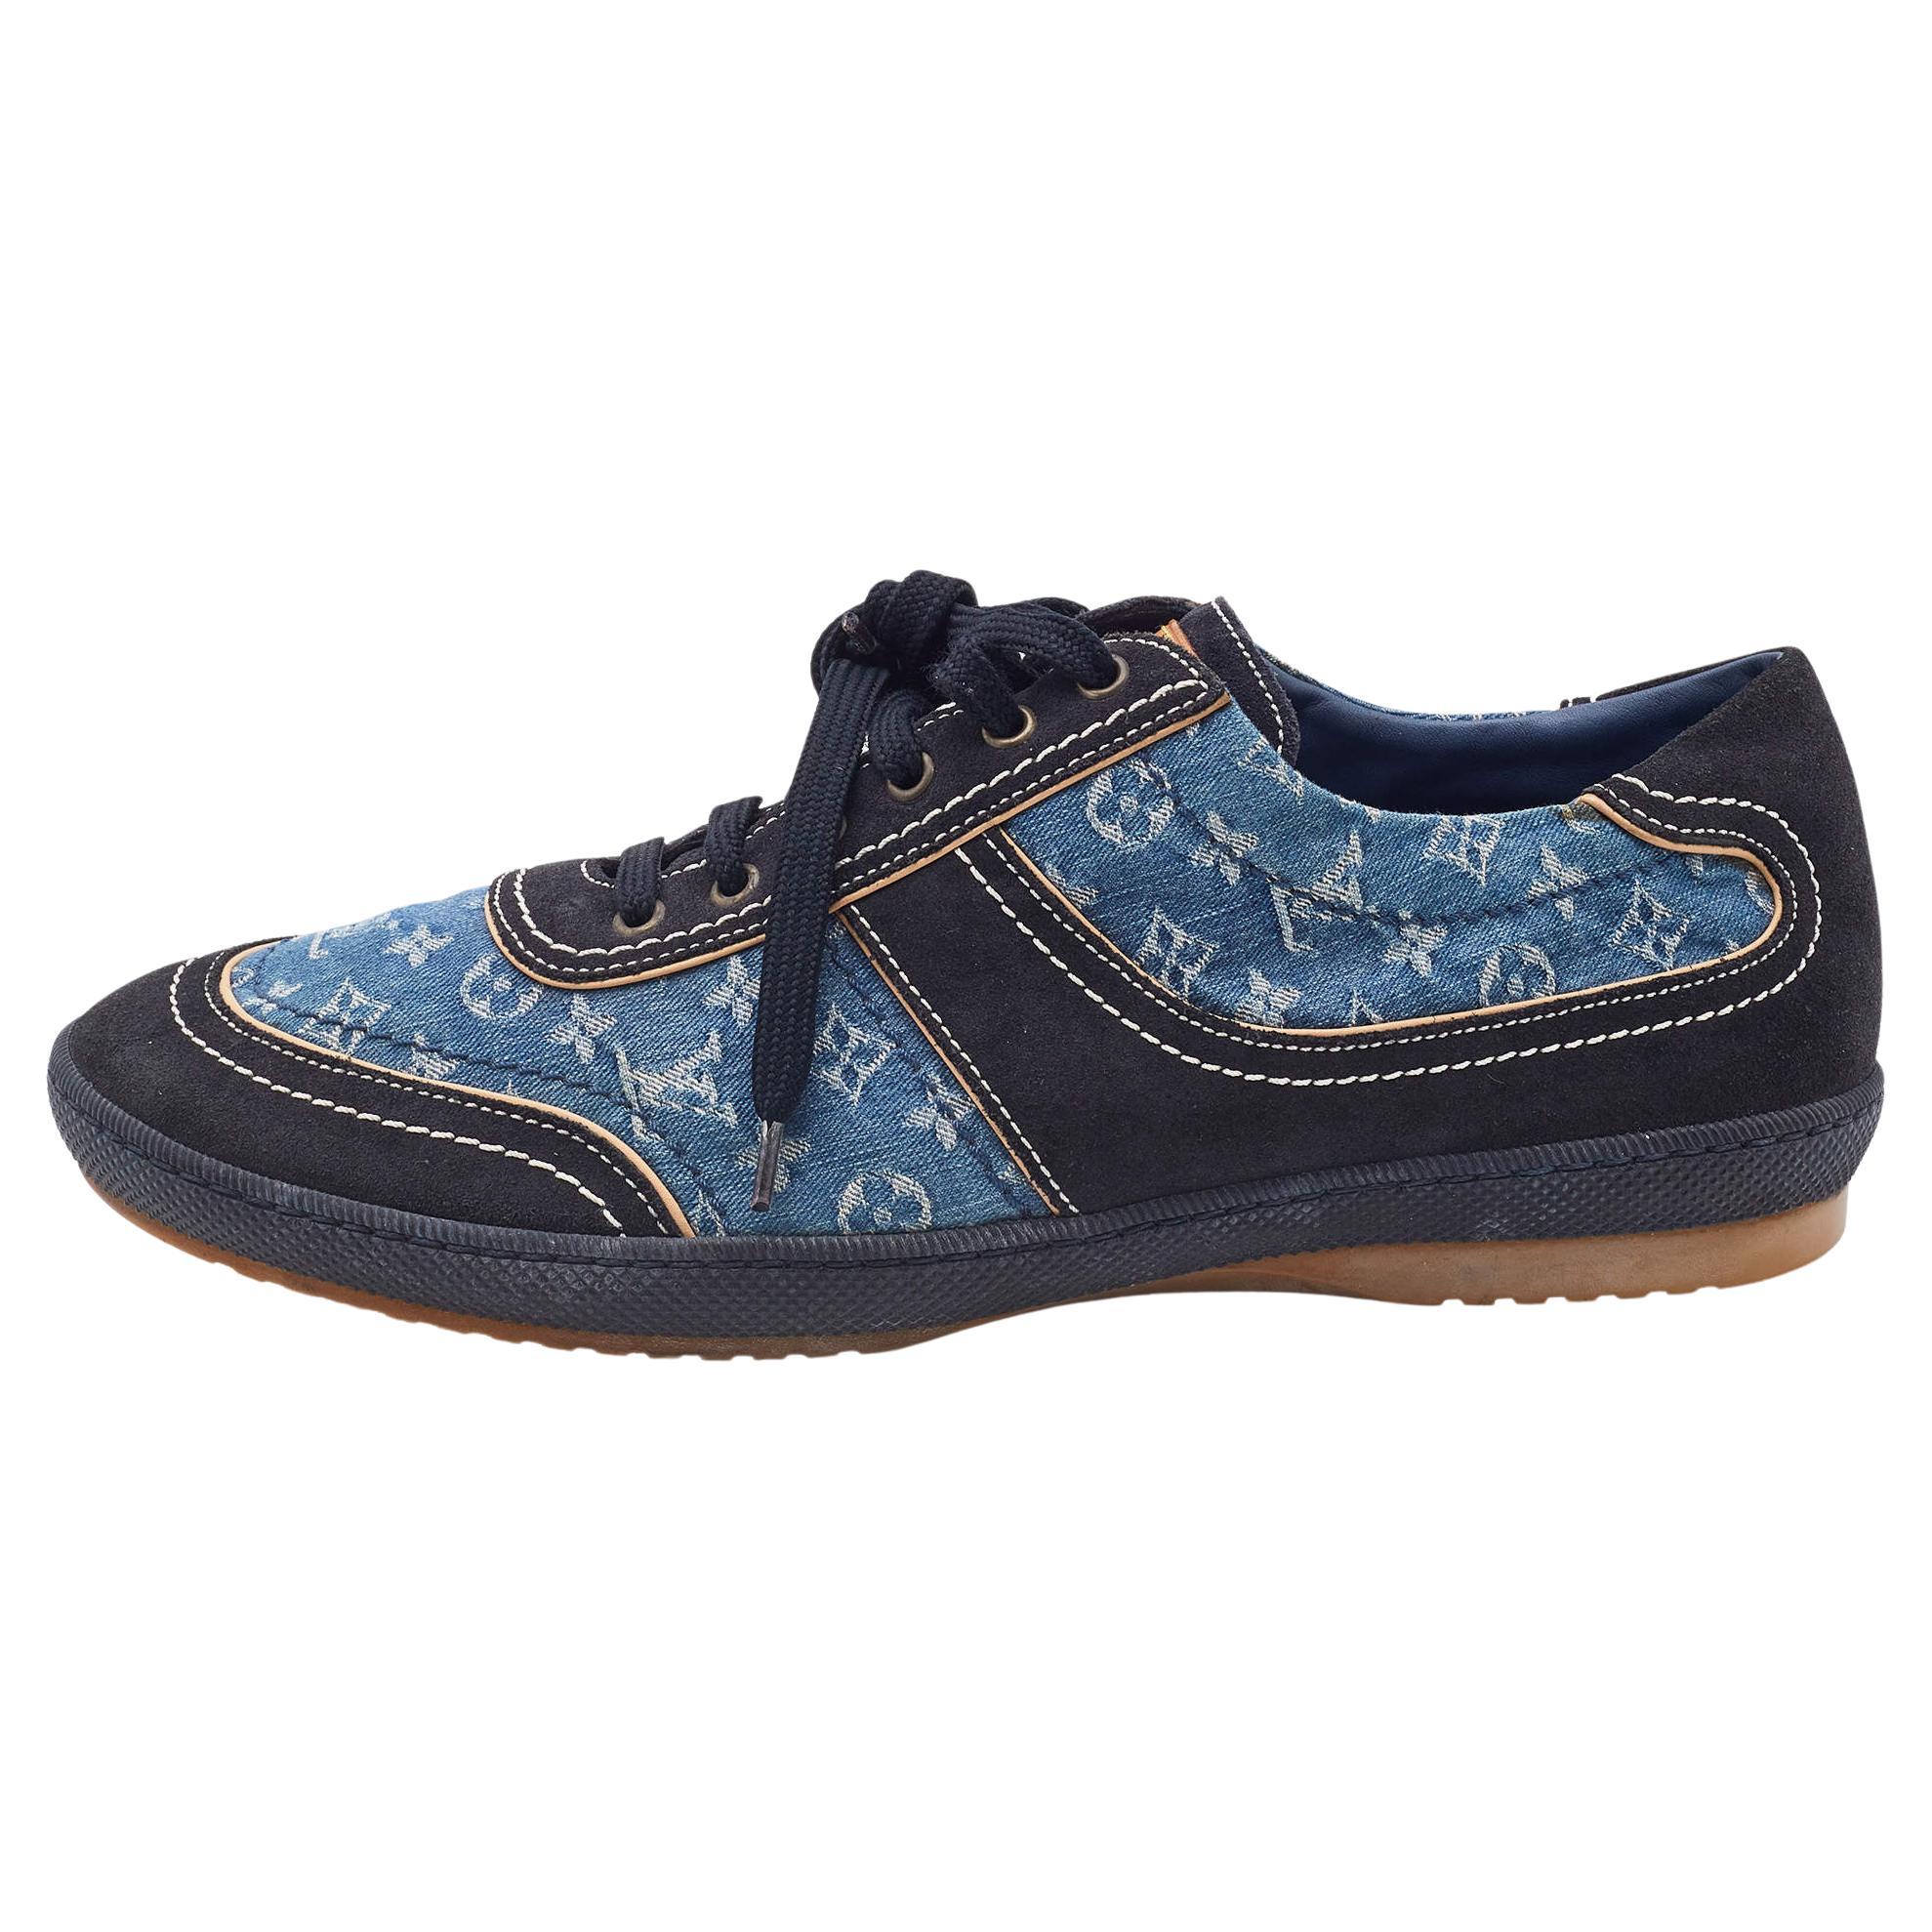 Louis Vuitton Monogram Denim and Leather Sneakers Trainers 36.5